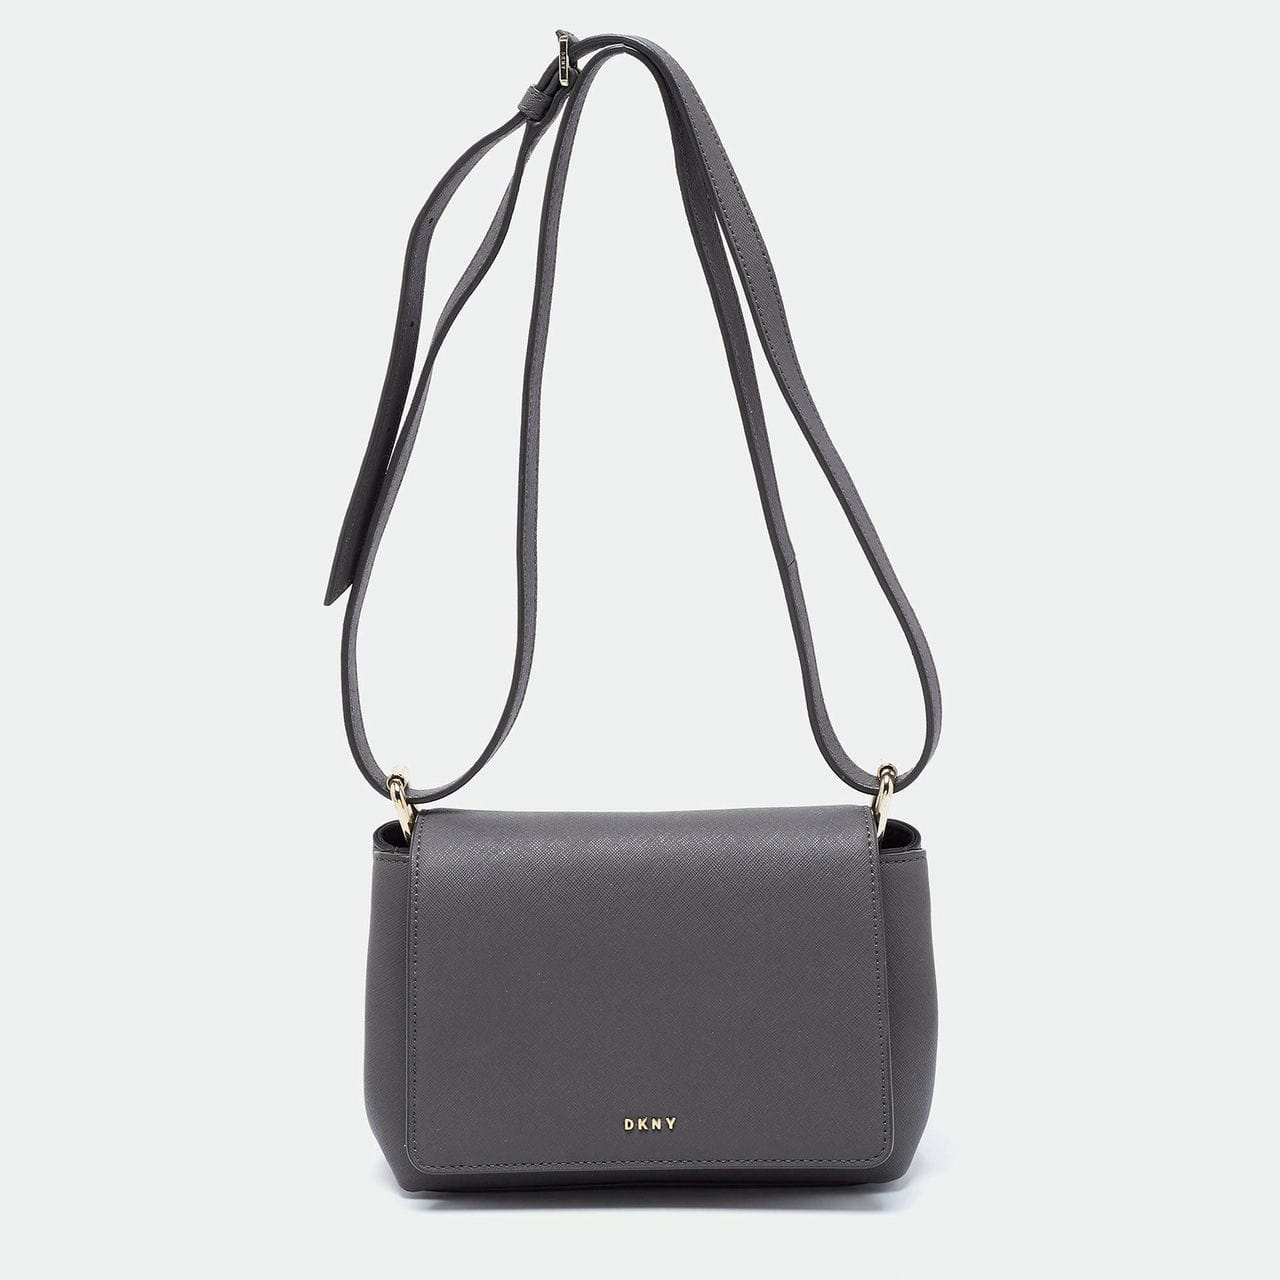 10 Popular DKNY Bags to Invest In – Inside The Closet